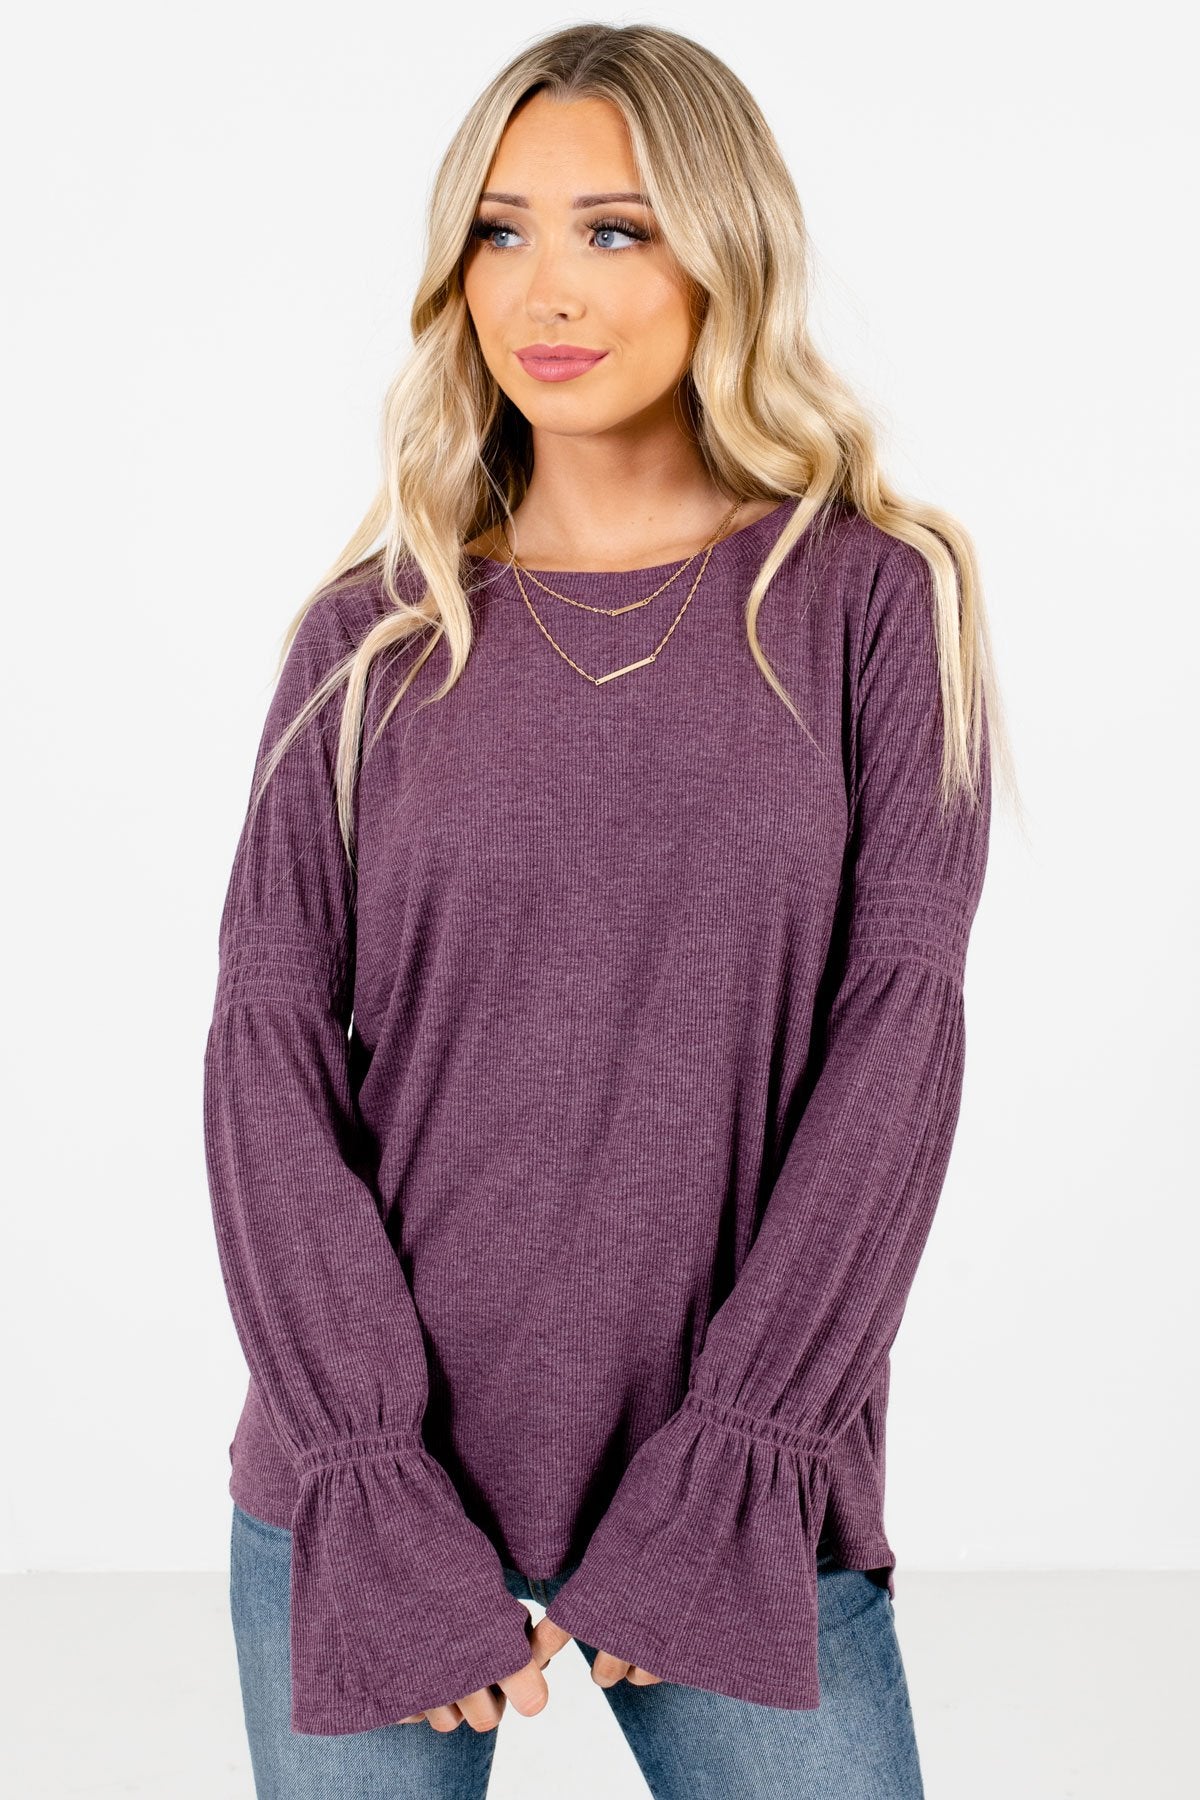 Women’s Purple Casual Everyday Boutique Tops